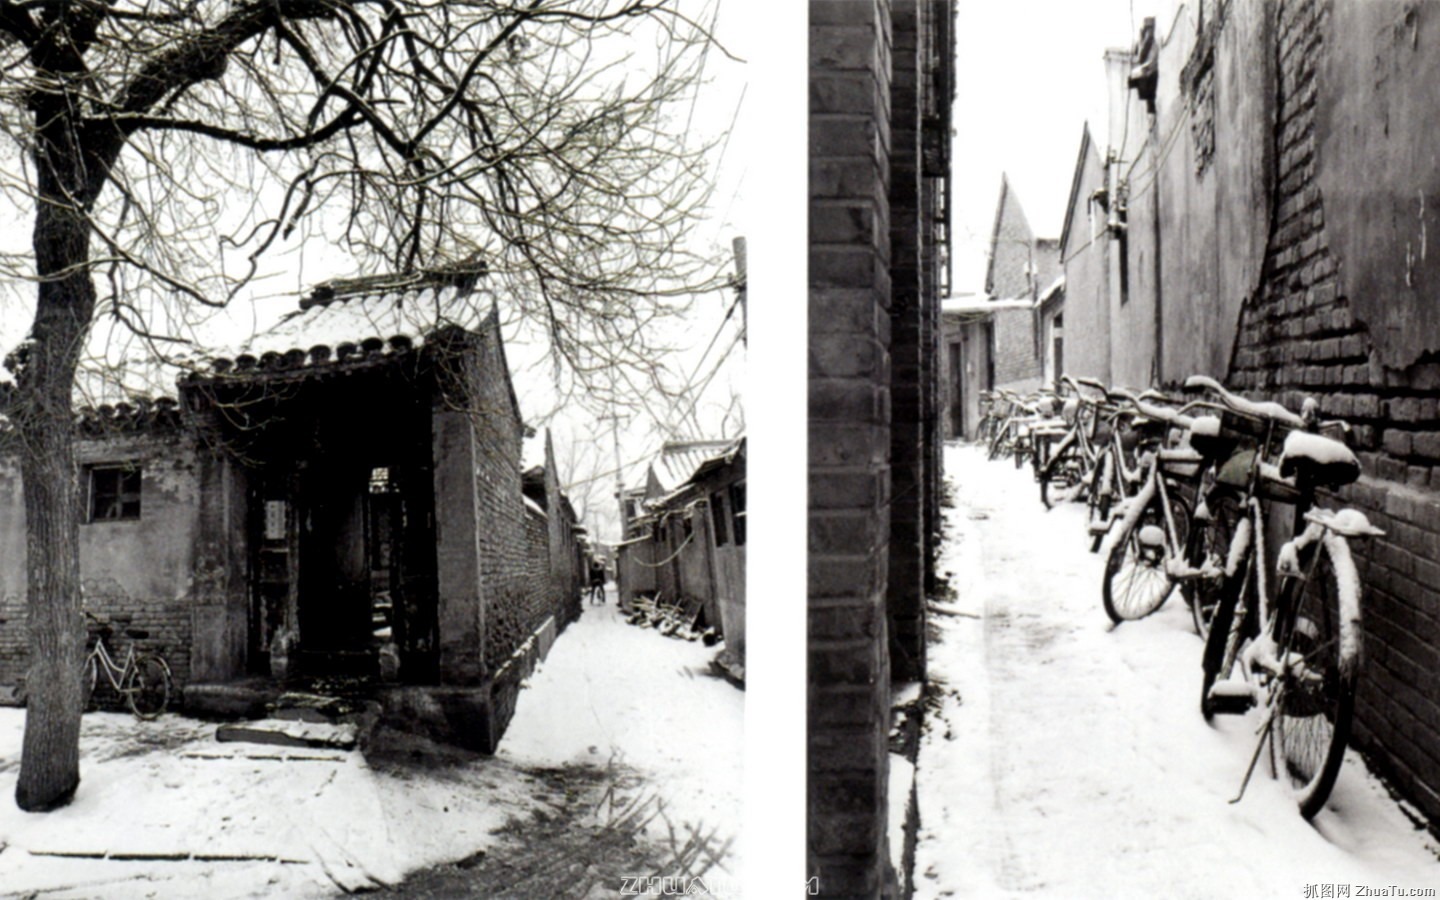 Old Hutong life for old photos wallpaper #30 - 1440x900